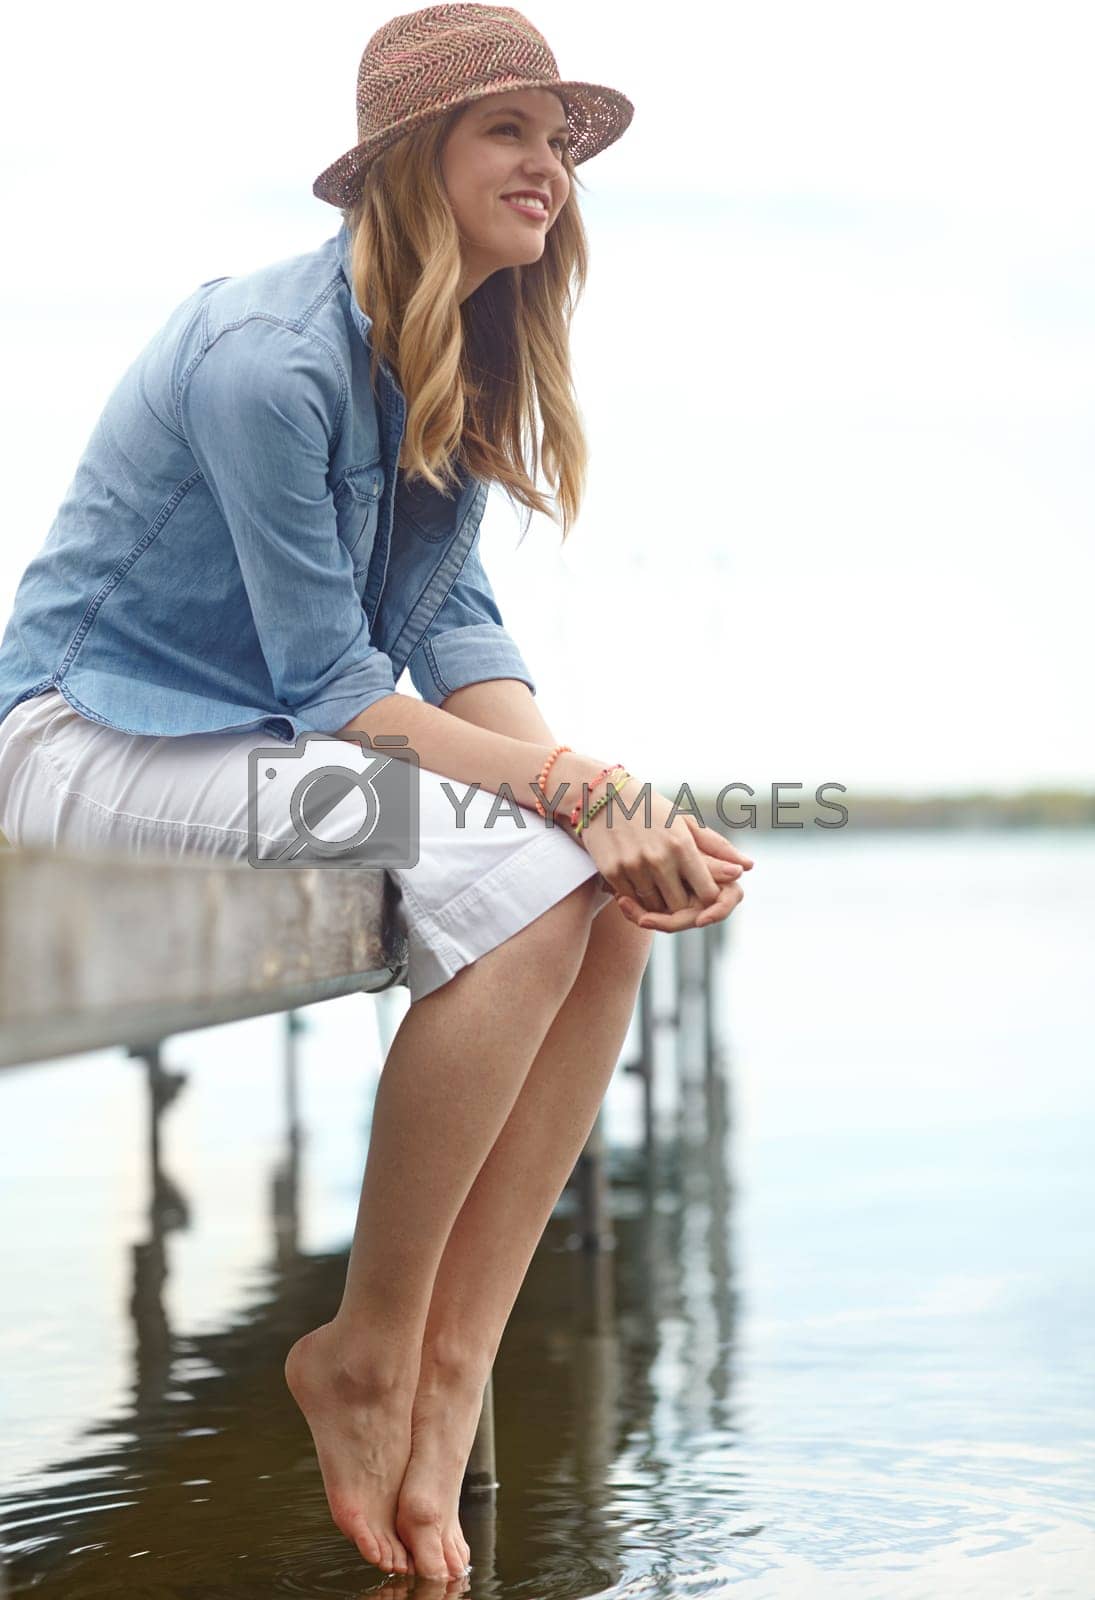 Royalty free image of Let your mind wander...A happy young woman sitting on a jetty next to a lake. by YuriArcurs